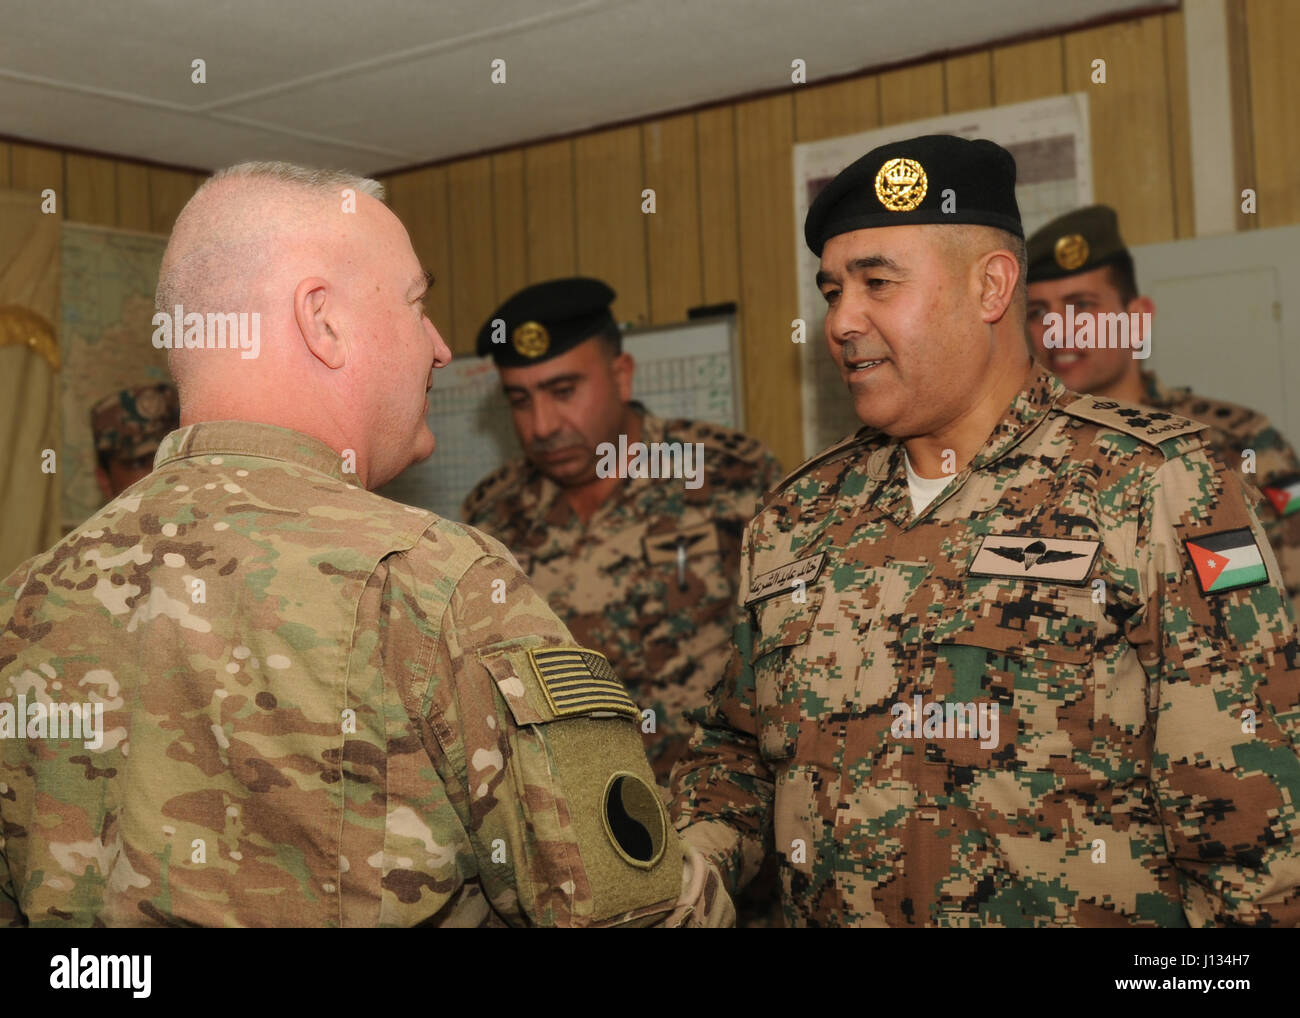 Jordanian Brig. Gen. Khalid Al-Shara, training deputy director for Jordan Armed Forces – Arab Army, greets Maj. Gen. Blake C. Ortner, commanding general for the 29th Infantry Division, during Ortner's visit to Jordan Feb. 6, 2017. The two leaders discussed the positive results of conducting joint training with American and Jordanian soldiers. (U.S. Army National Guard photo by Sgt. Kelly Gary, 29th Infantry Division Public Affairs) Stock Photo